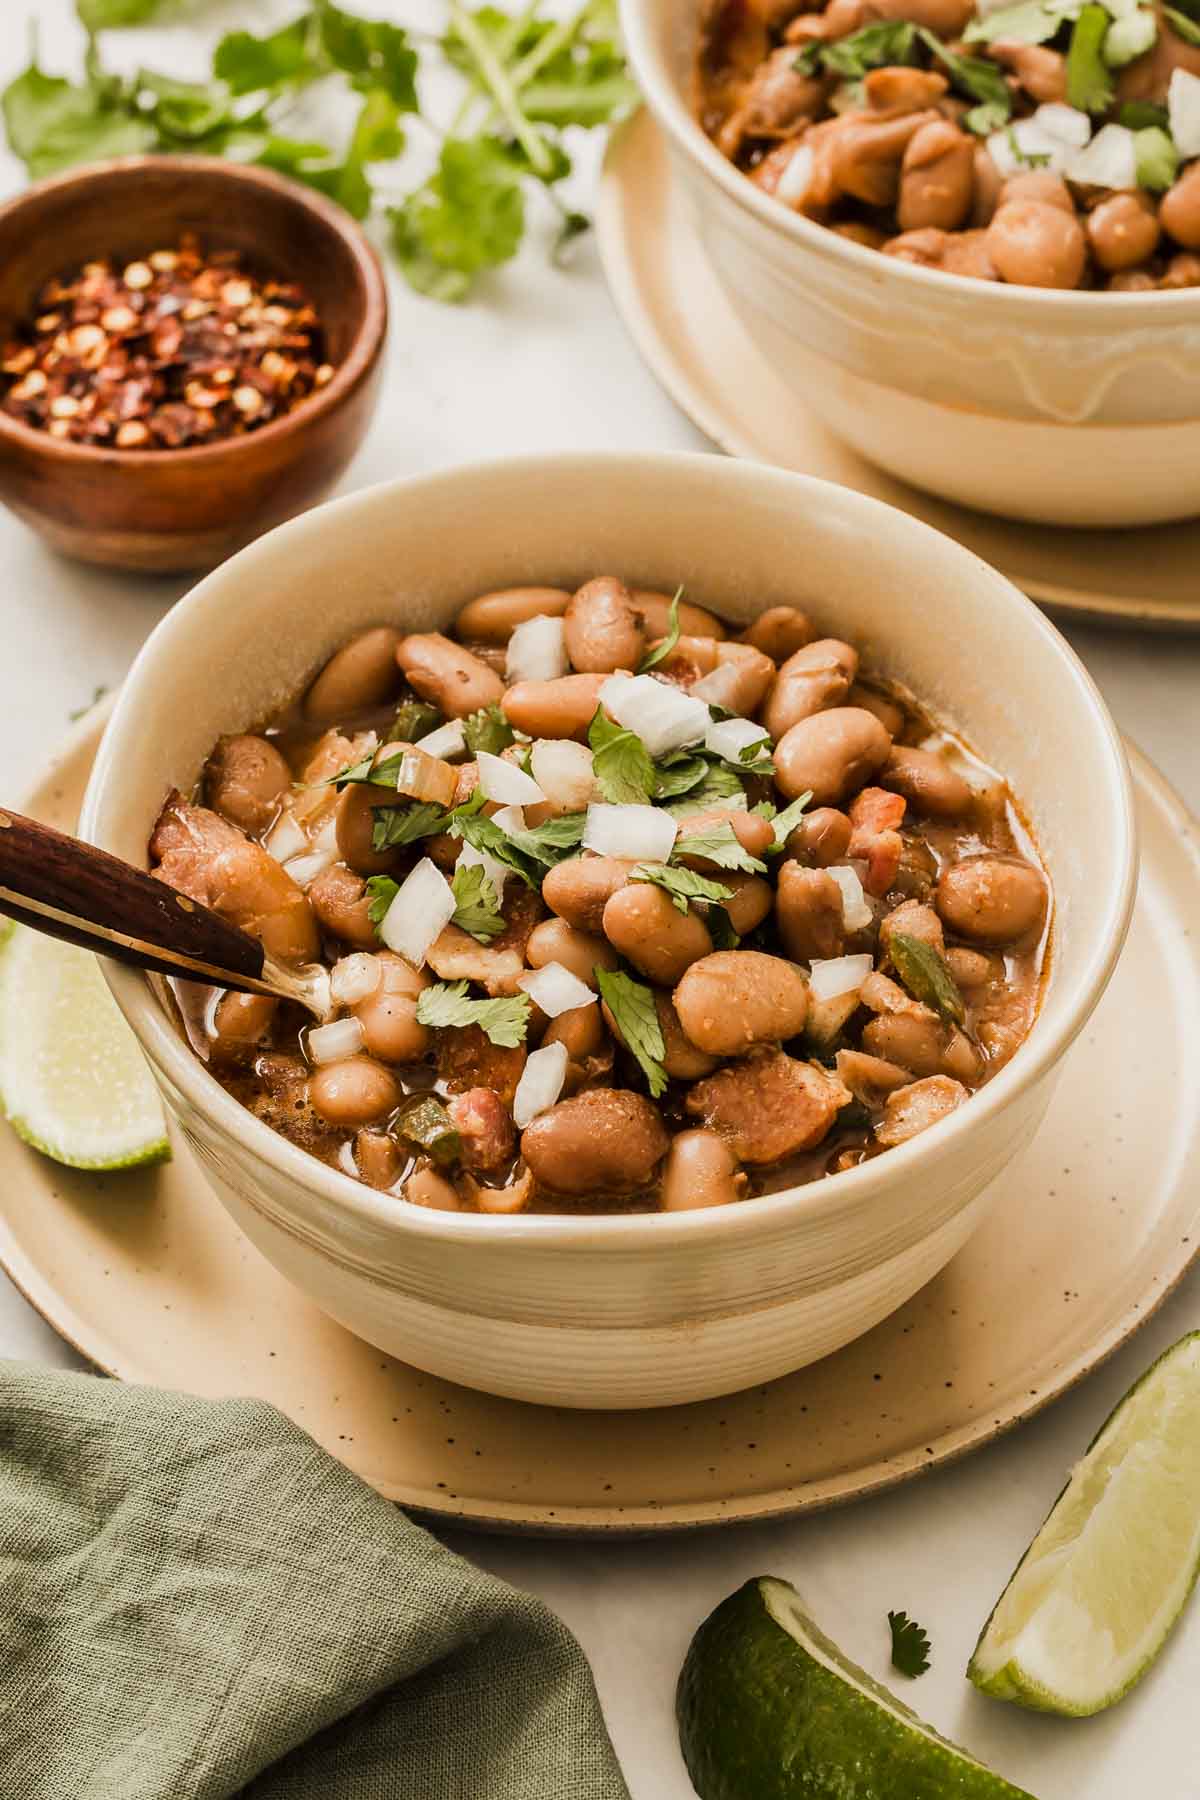 Cream bowl of brown pinto beans cooked into borracho beans garnished with onion and cilantro.